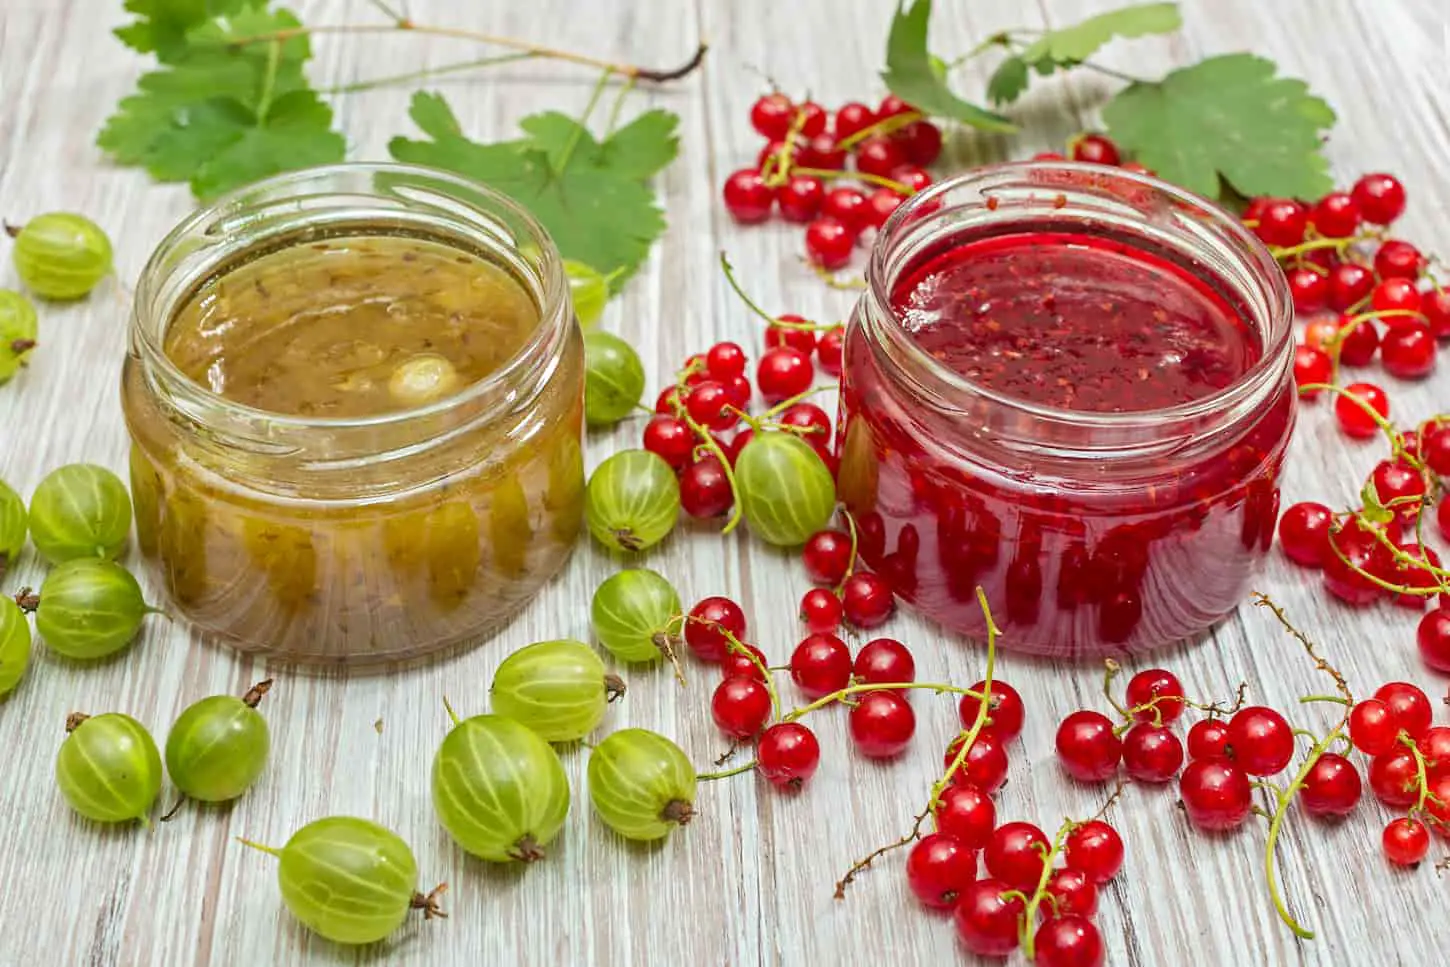 An image of Gooseberry jam and fresh berries, on a light wooden background.